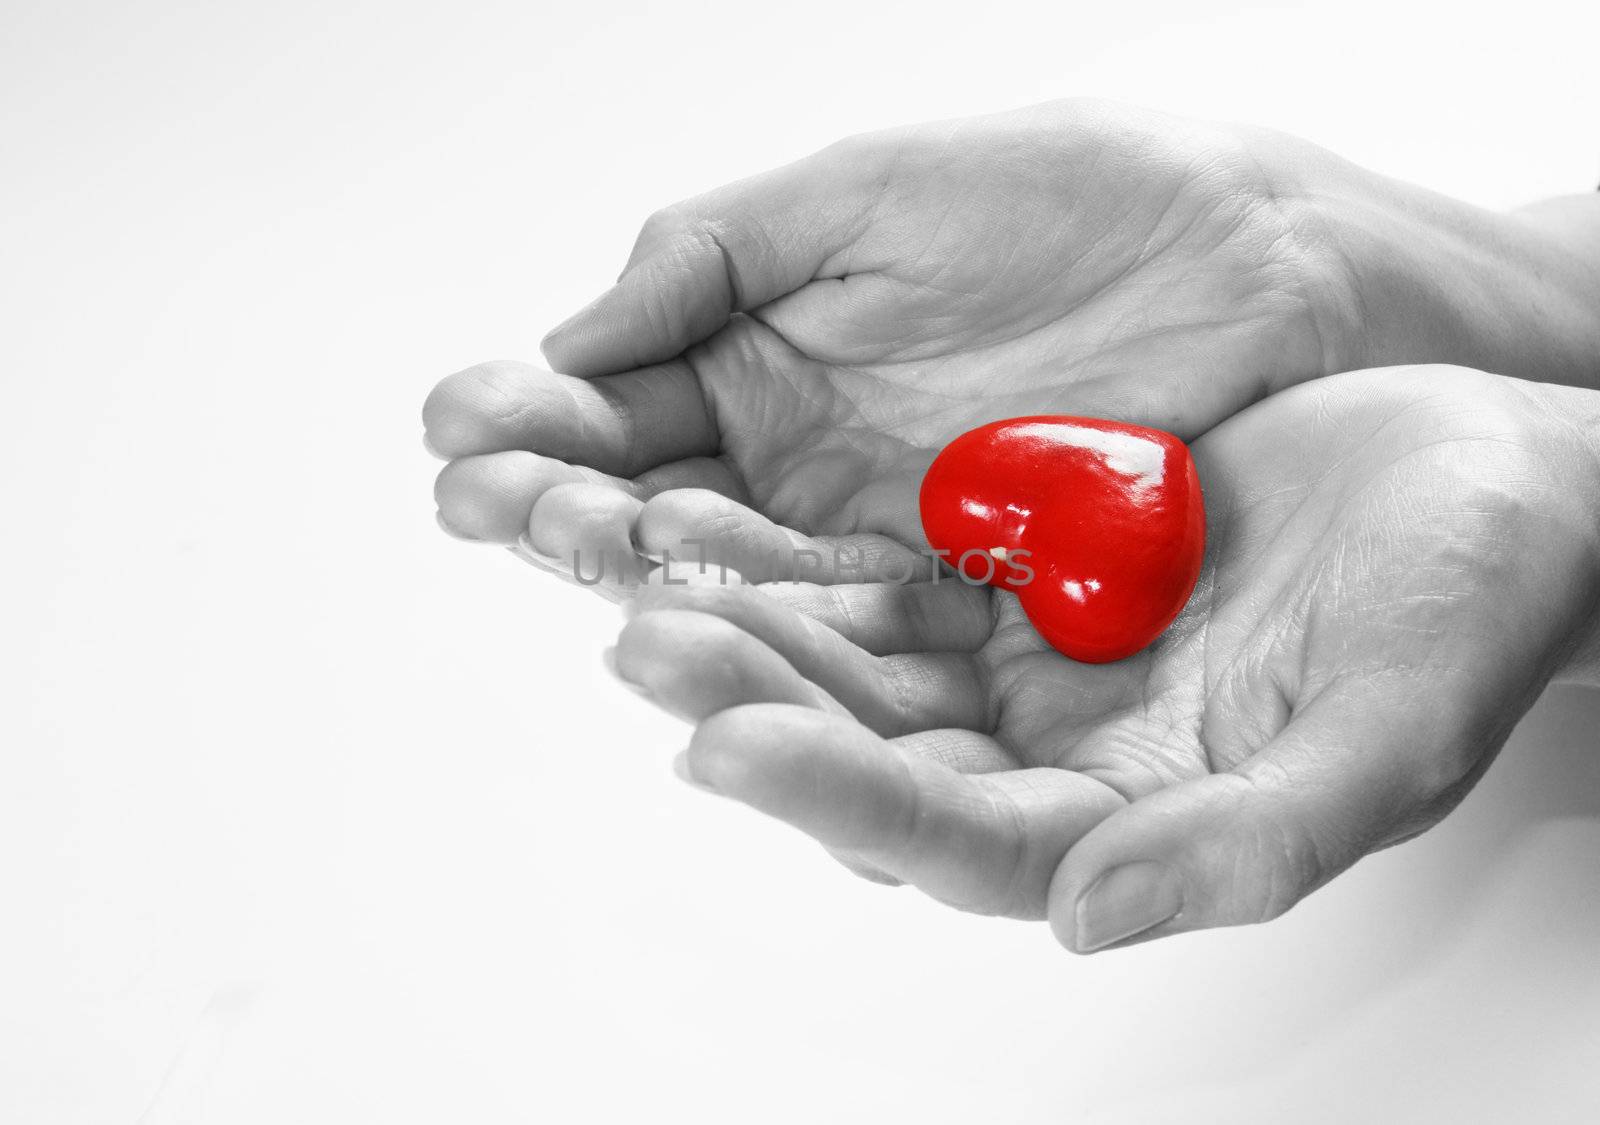 Heart in hands conceptual image. Love, care, health themes.